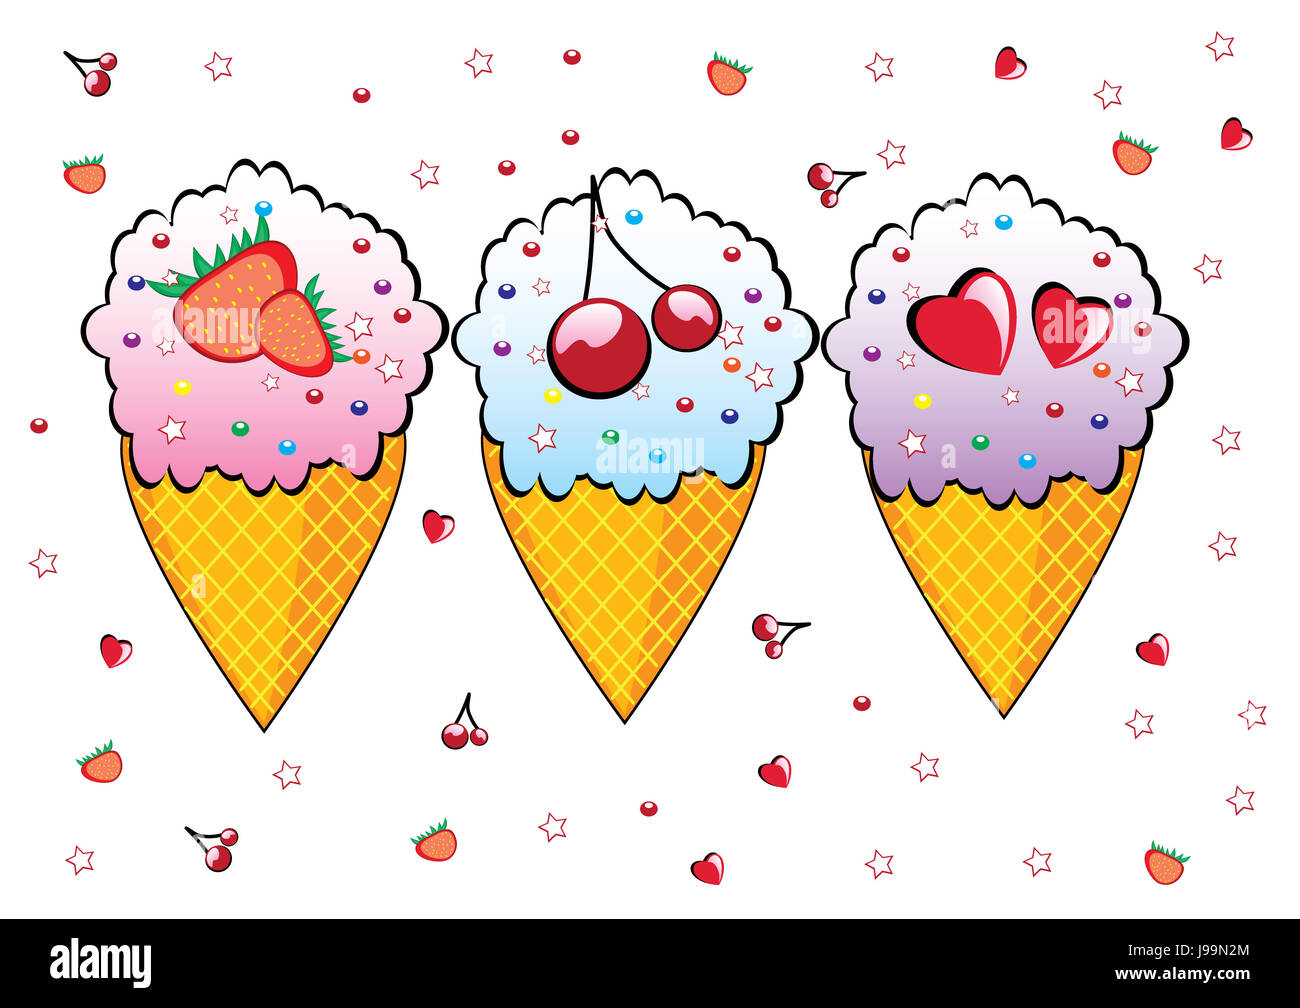 Ice Cream Cone, Ice Cream Scoop, Summer Clipart, Sweet Clip Art, Ice Cream  Truck, Sprinkles Graphics, Food Images, Cute Kawaii Png, Kids Cli 